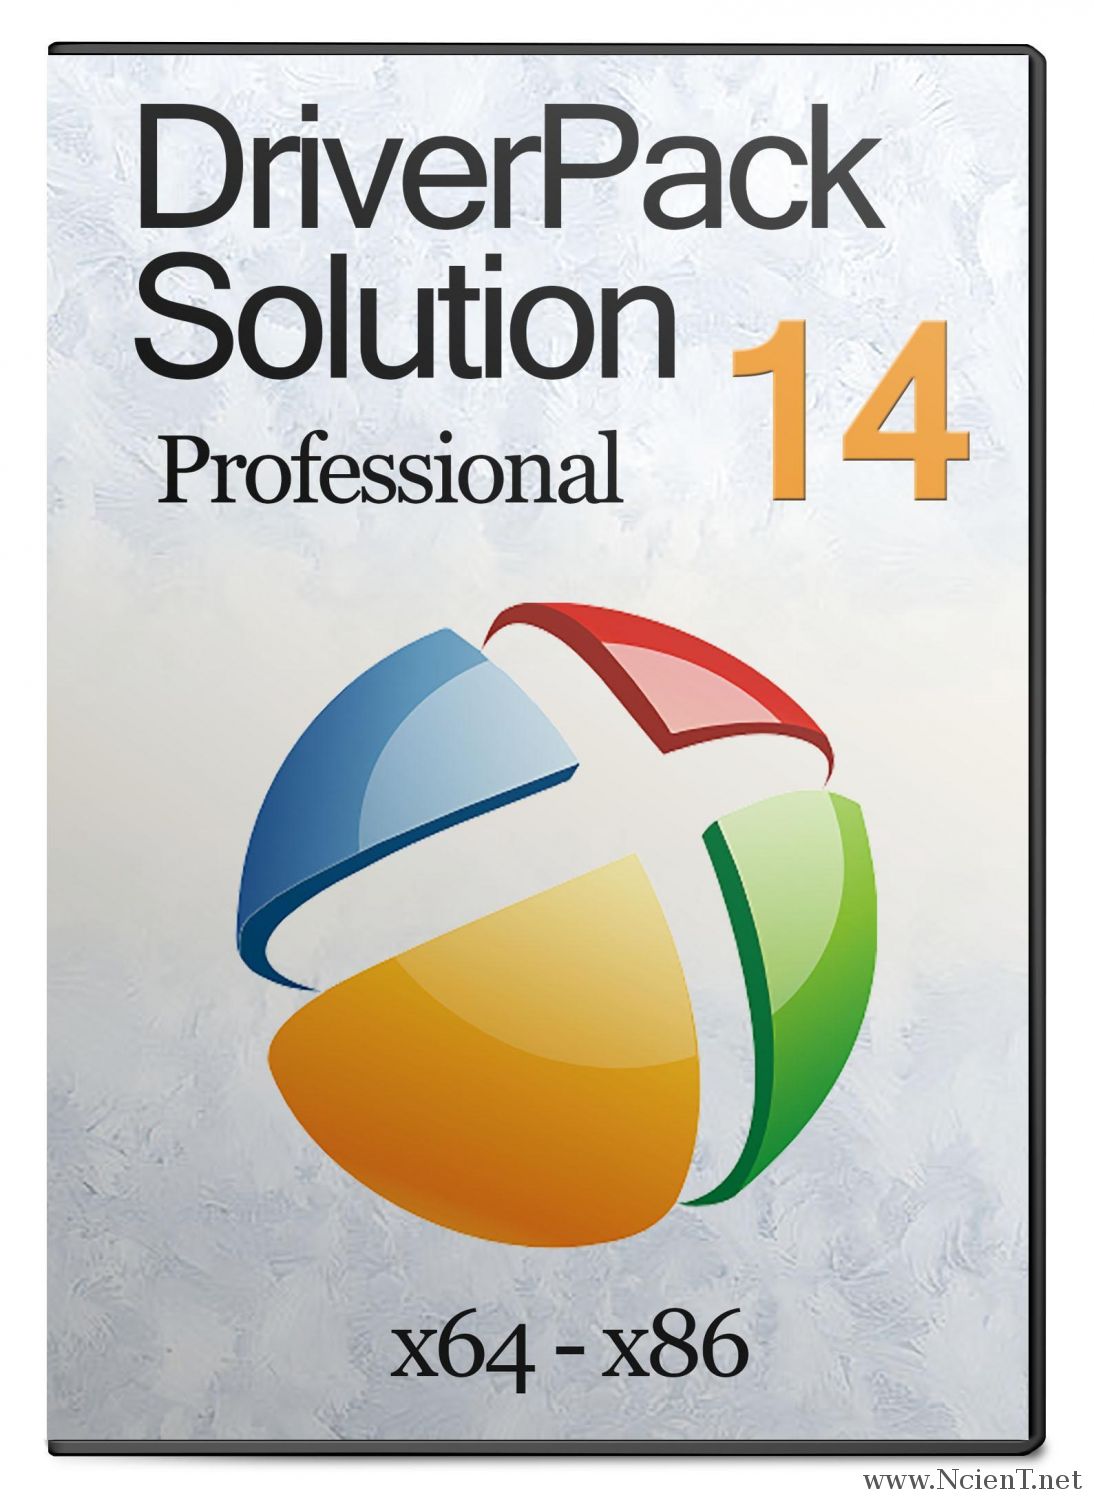 DriverPack Solution 14.8